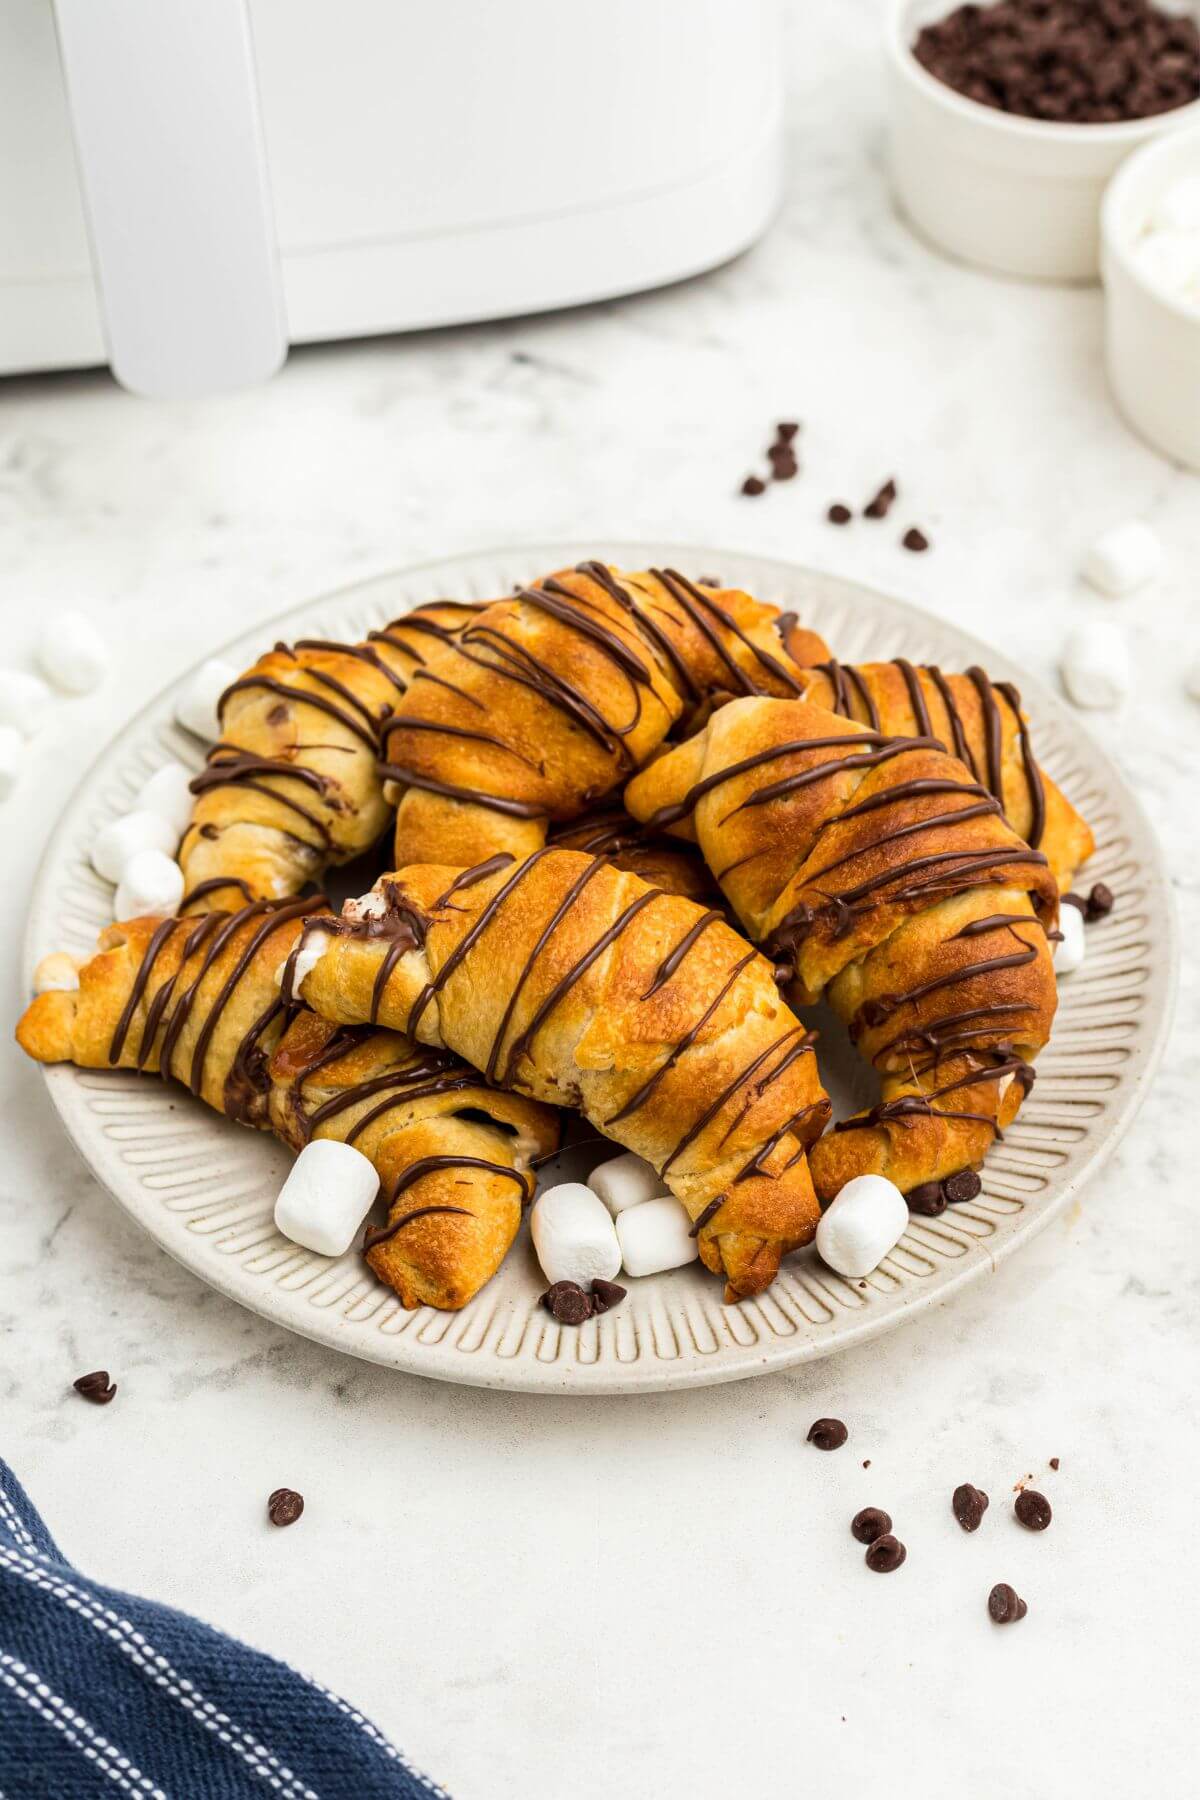 Golden flaky crescent rolls filled with marshmallows and chocolate chips, stacked on a cream plate with a blue linen. 